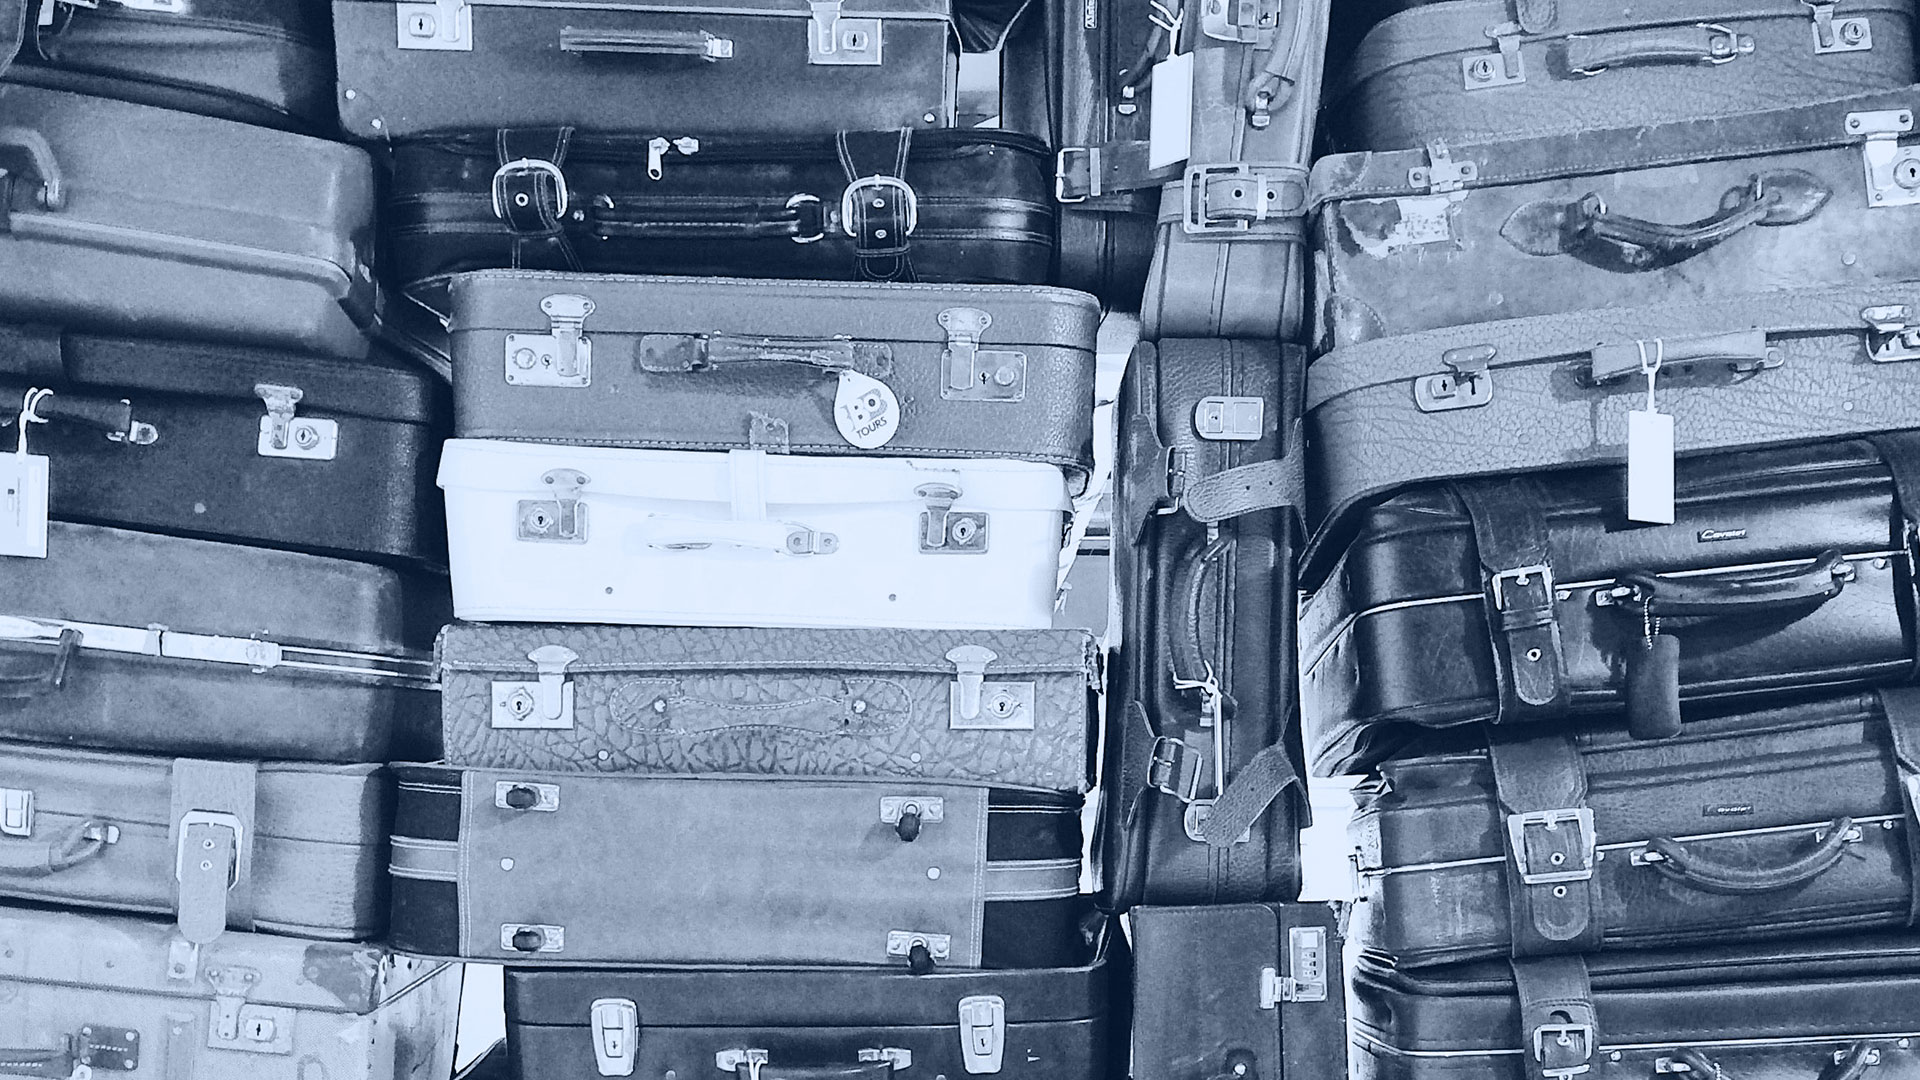 Suitcases stacked for travel.